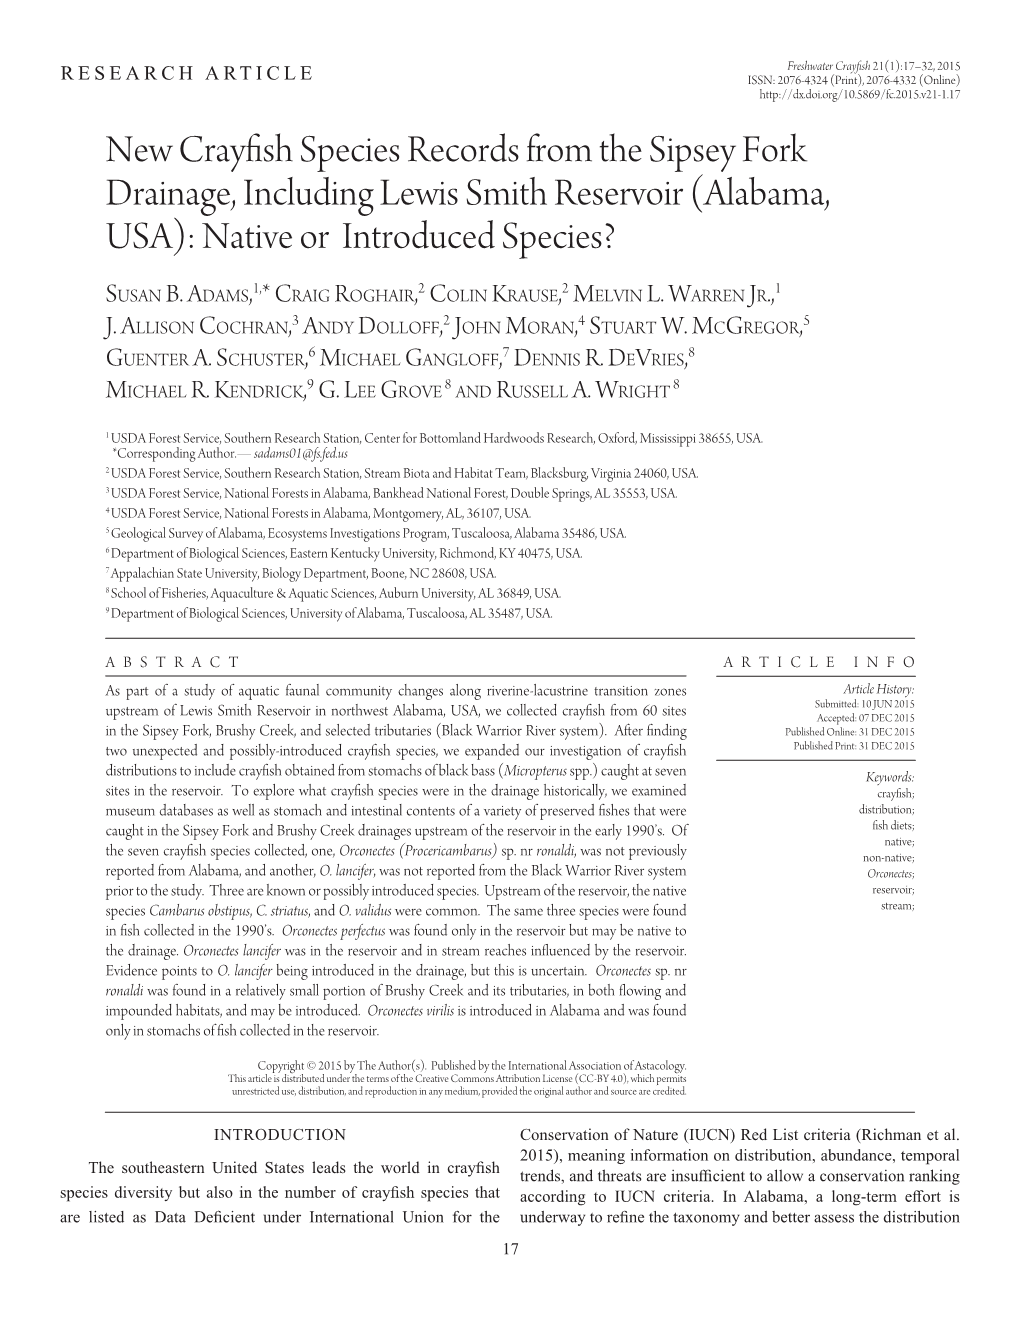 New Crayfish Species Records from the Sipsey Fork Drainage, Including Lewis Smith Reservoir (Alabama, USA): Native Or Introduced Species?